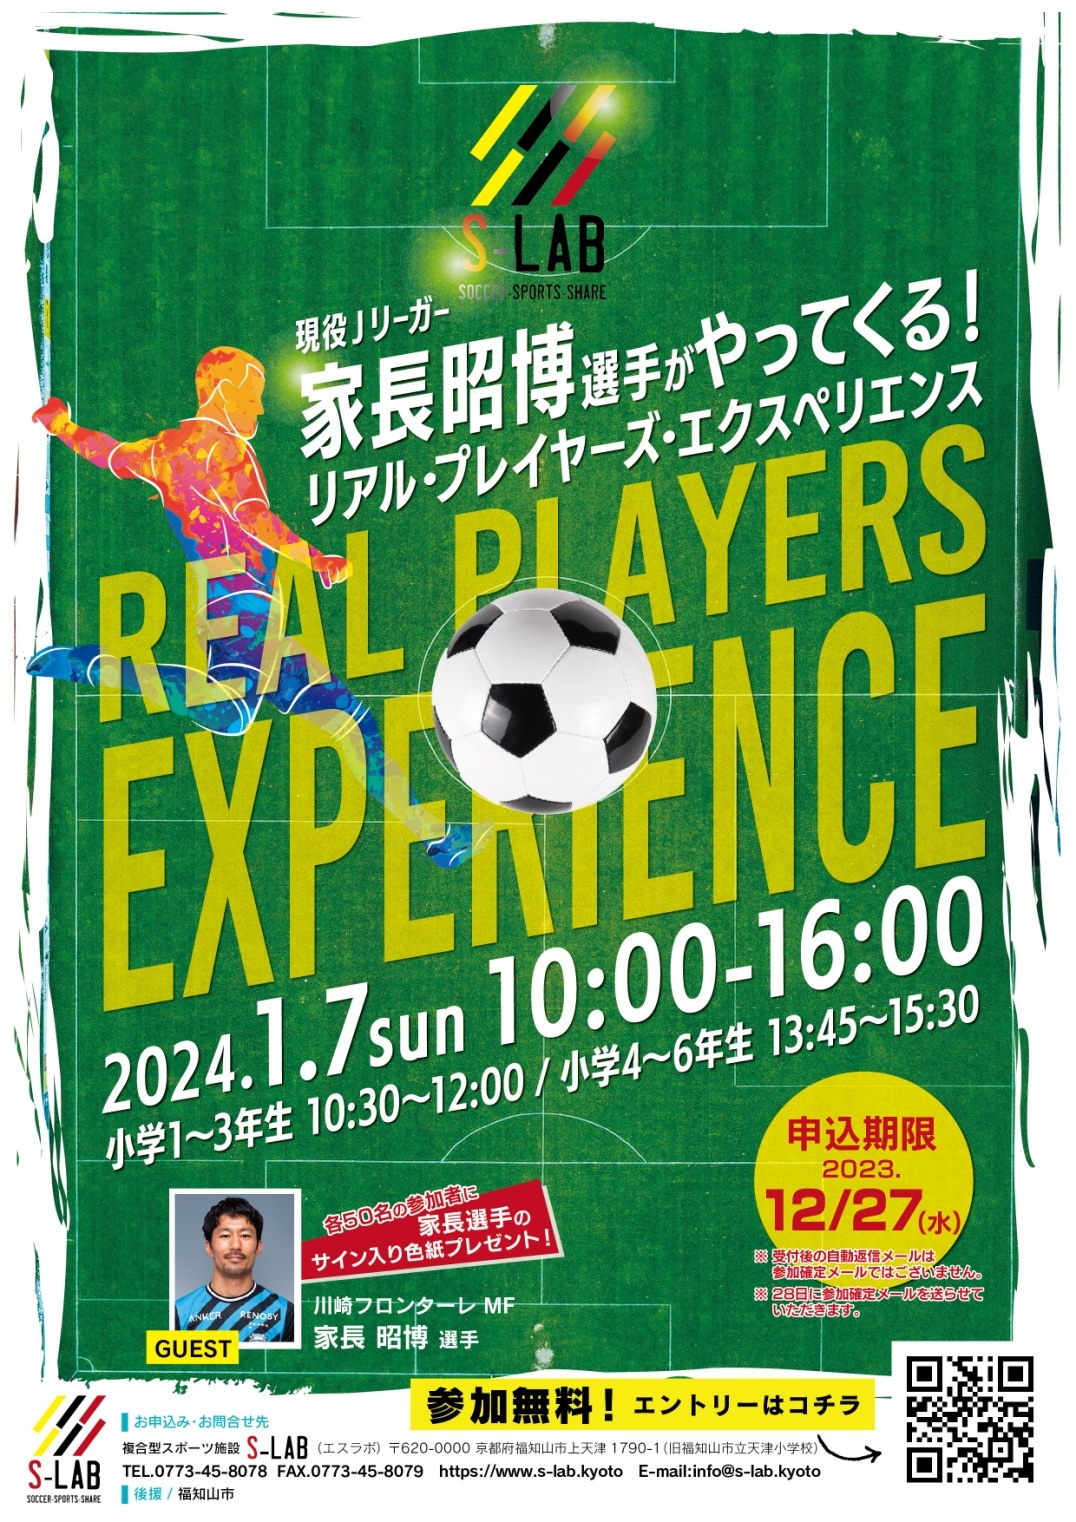 REAL PLAYERS EXPERIENCE 開催決定